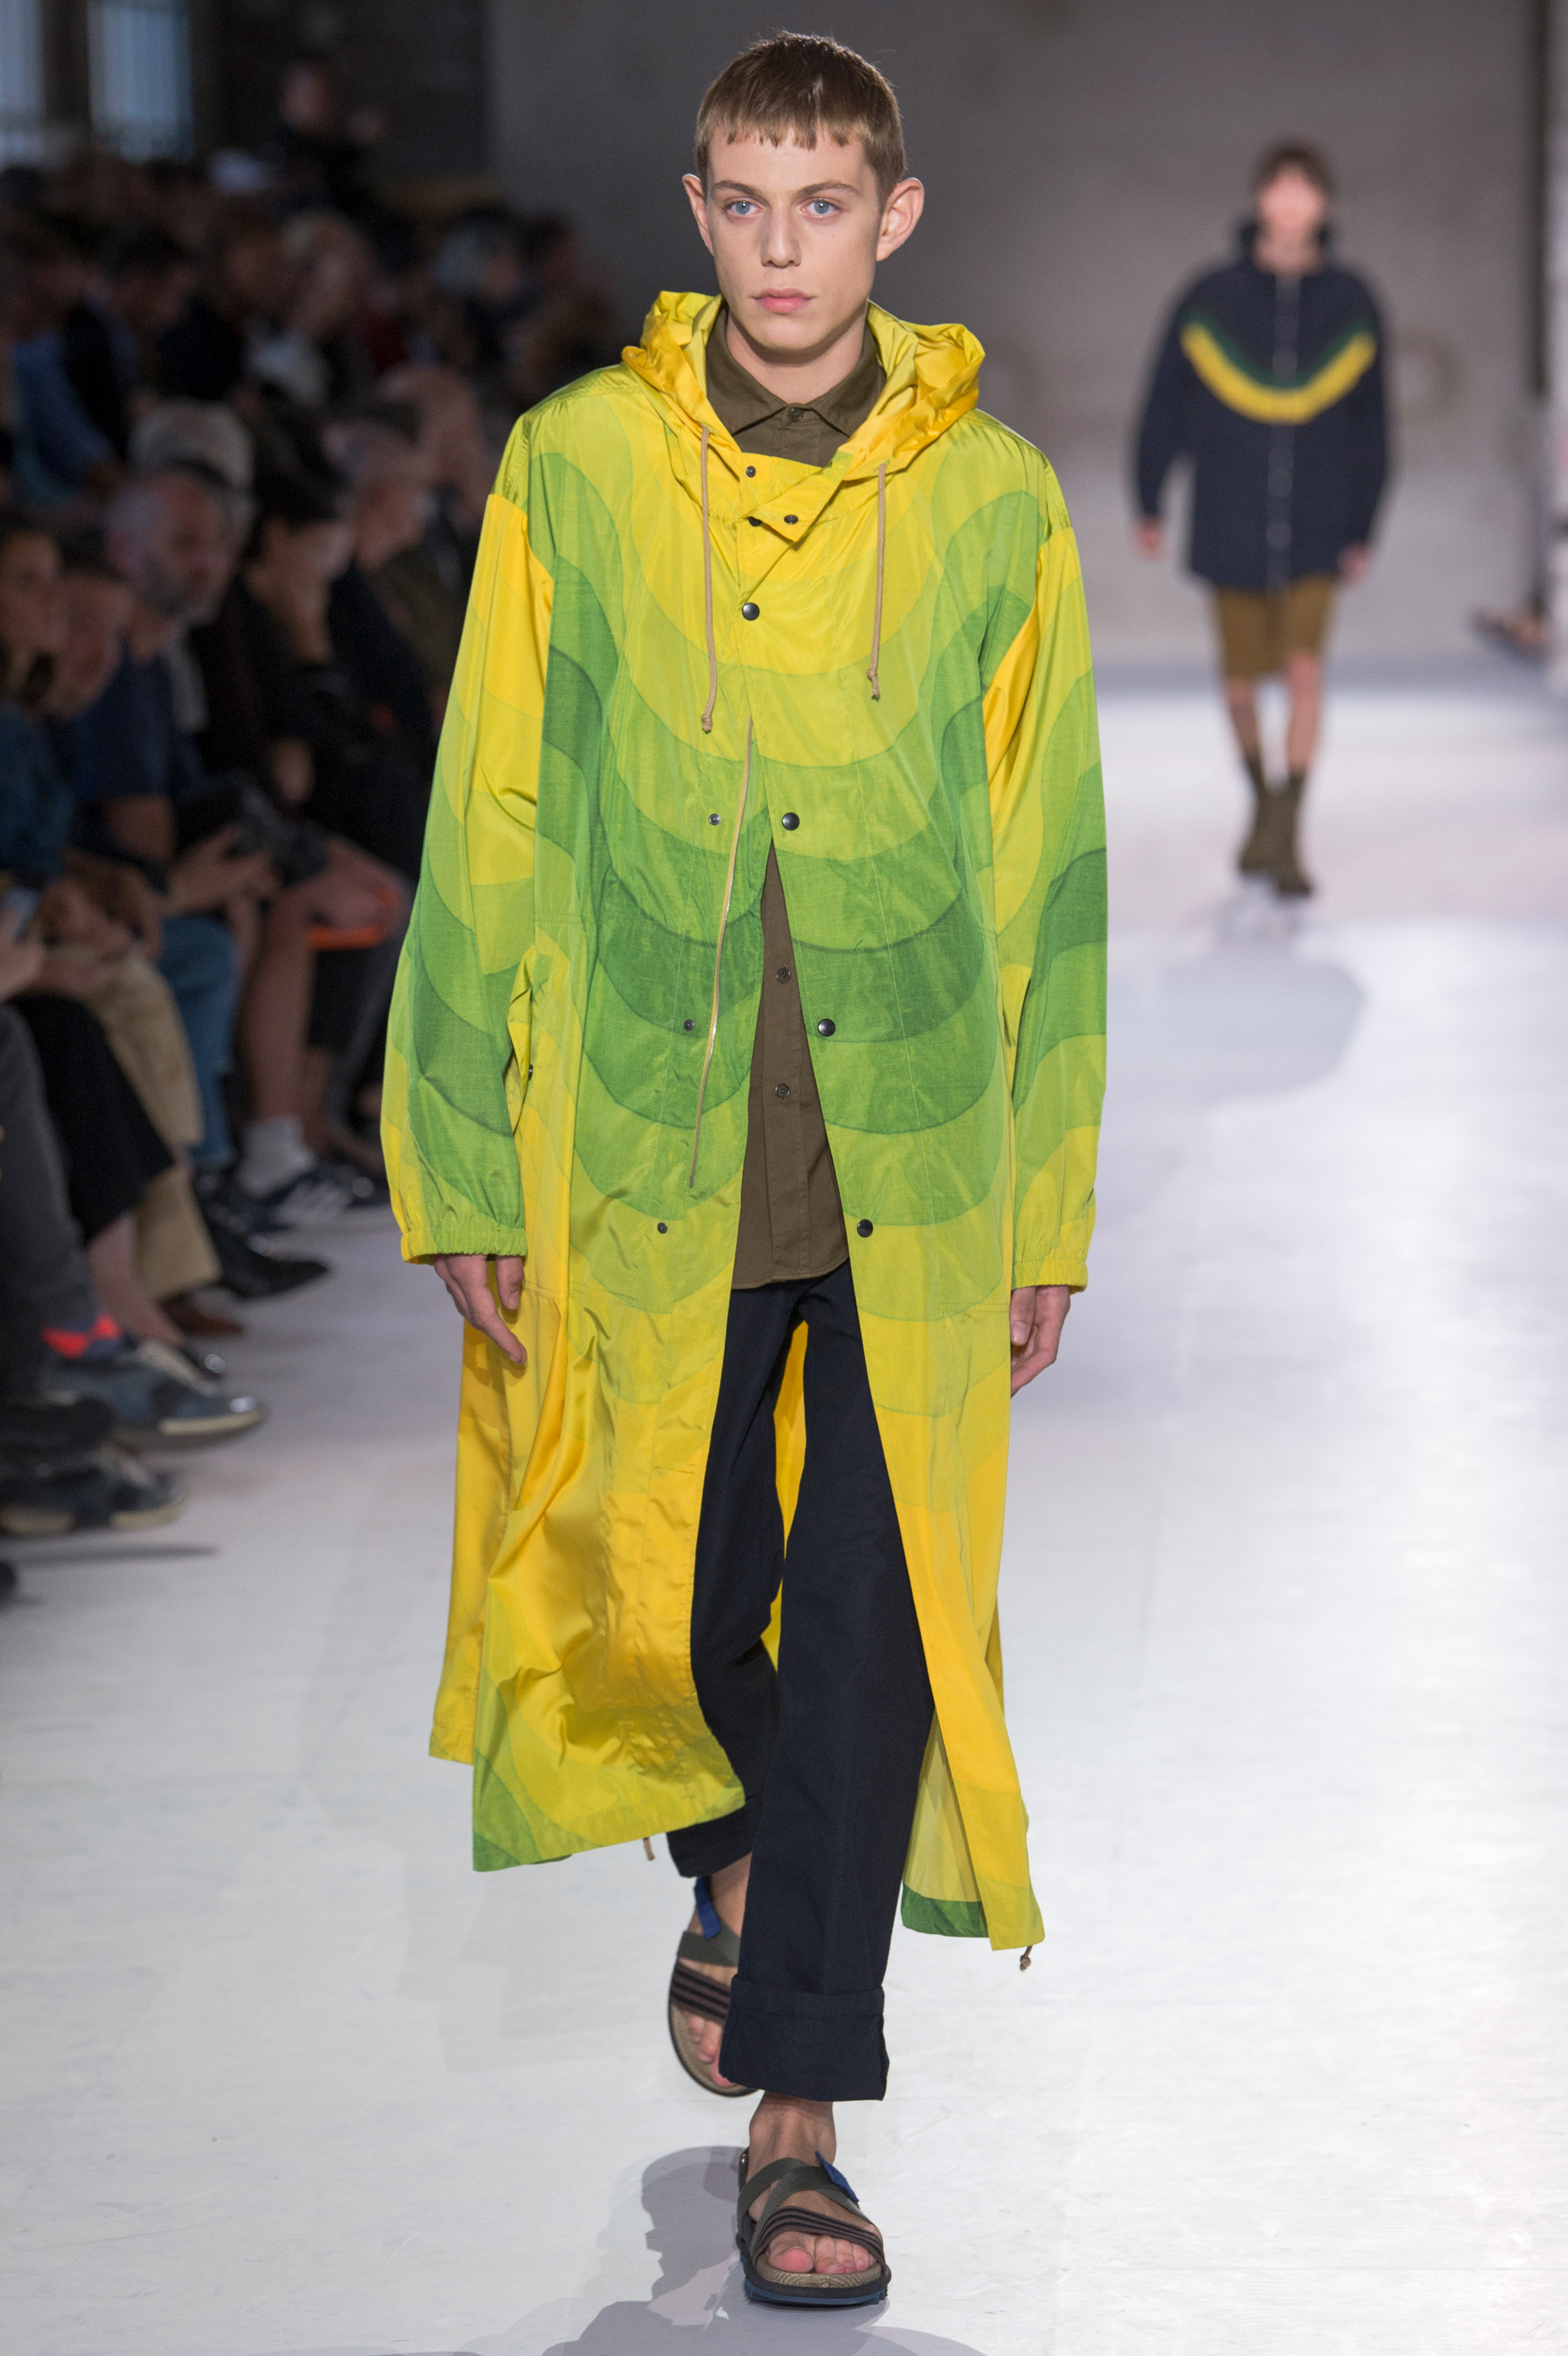 Dries Van Noten pays homage to Verner Panton with colourful SS19 